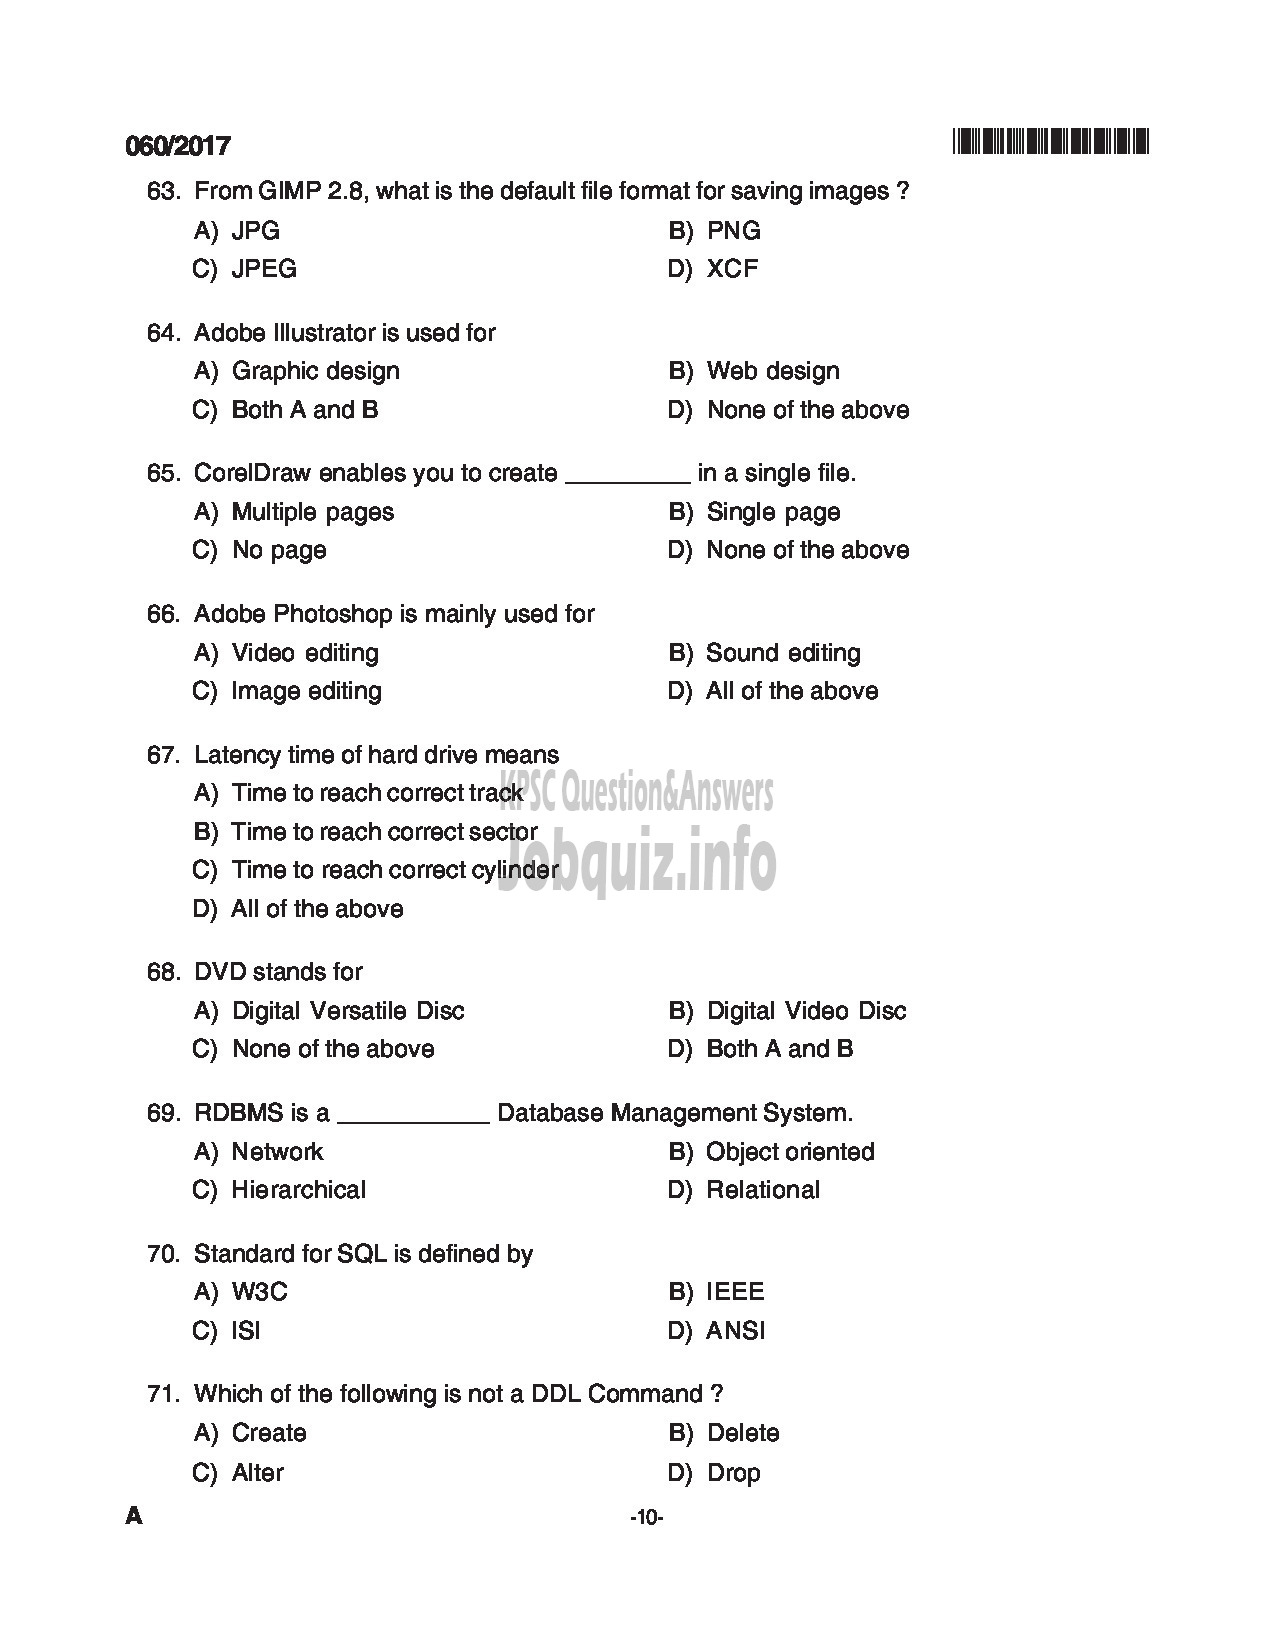 Kerala PSC Question Paper - TRADESMAN COMPUTER ENGINEERING TECHNICAL EDUCATION QUESTION PAPER-10